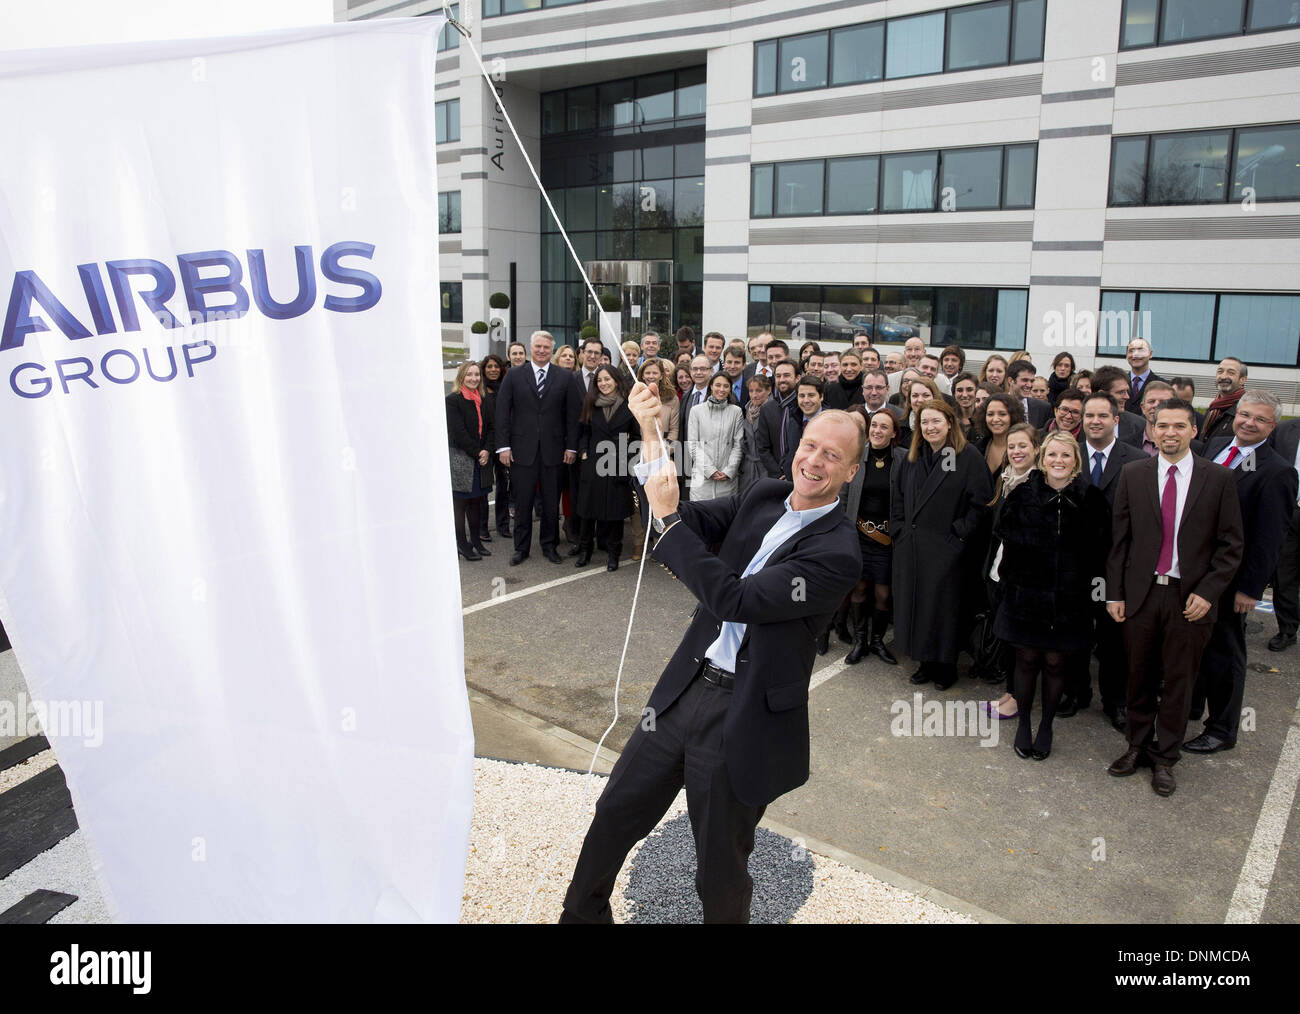 (140102) -- TOULOUSE, Jan. 2, 2014 (Xinhua) -- File photo taken on Dec. 18, 2013 shows Tom Enders, CEO of Airbus Group, raising a flag with a new logo in front of Airbus Group Headquarters in Toulouse, France. European aerospace giant Aeronautic, Defense and Space Corporation (EADS) on Jan. 1 formally renamed itself after its flagship brand, Airbus, in an attempt to streamline the company's structure and boost the predominance of commercial aeronautics. (Xinhua) Stock Photo